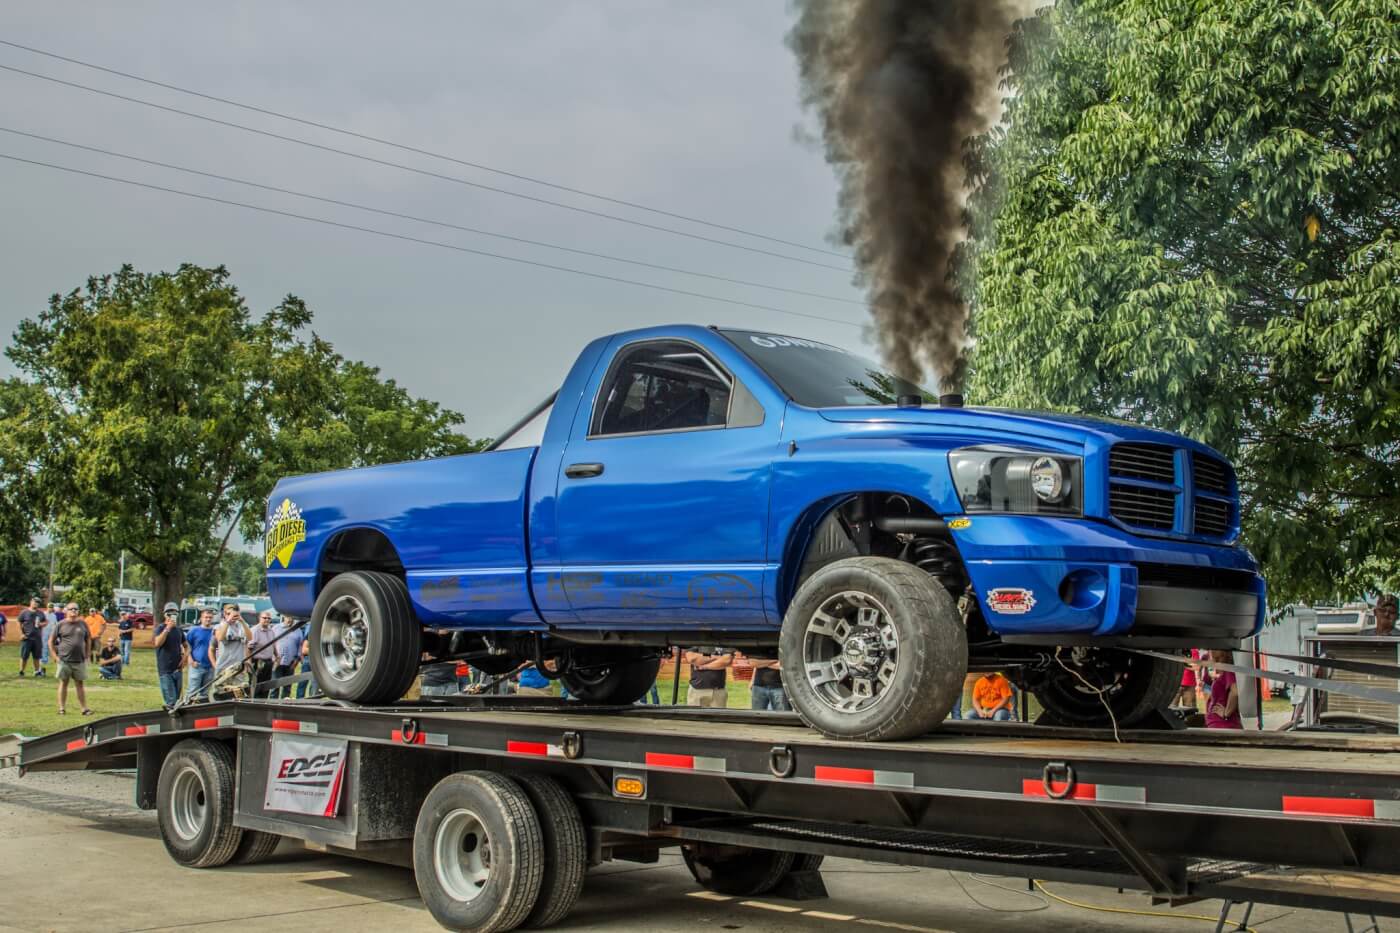 Derek Rose’s BD Diesel-sponsored (therefore, not in dyno competition) drag truck made an exhibition dyno pull of almost 1,550 horsepower with over 2,100 lb-ft. of torque, making it the highest power dyno run of the event!